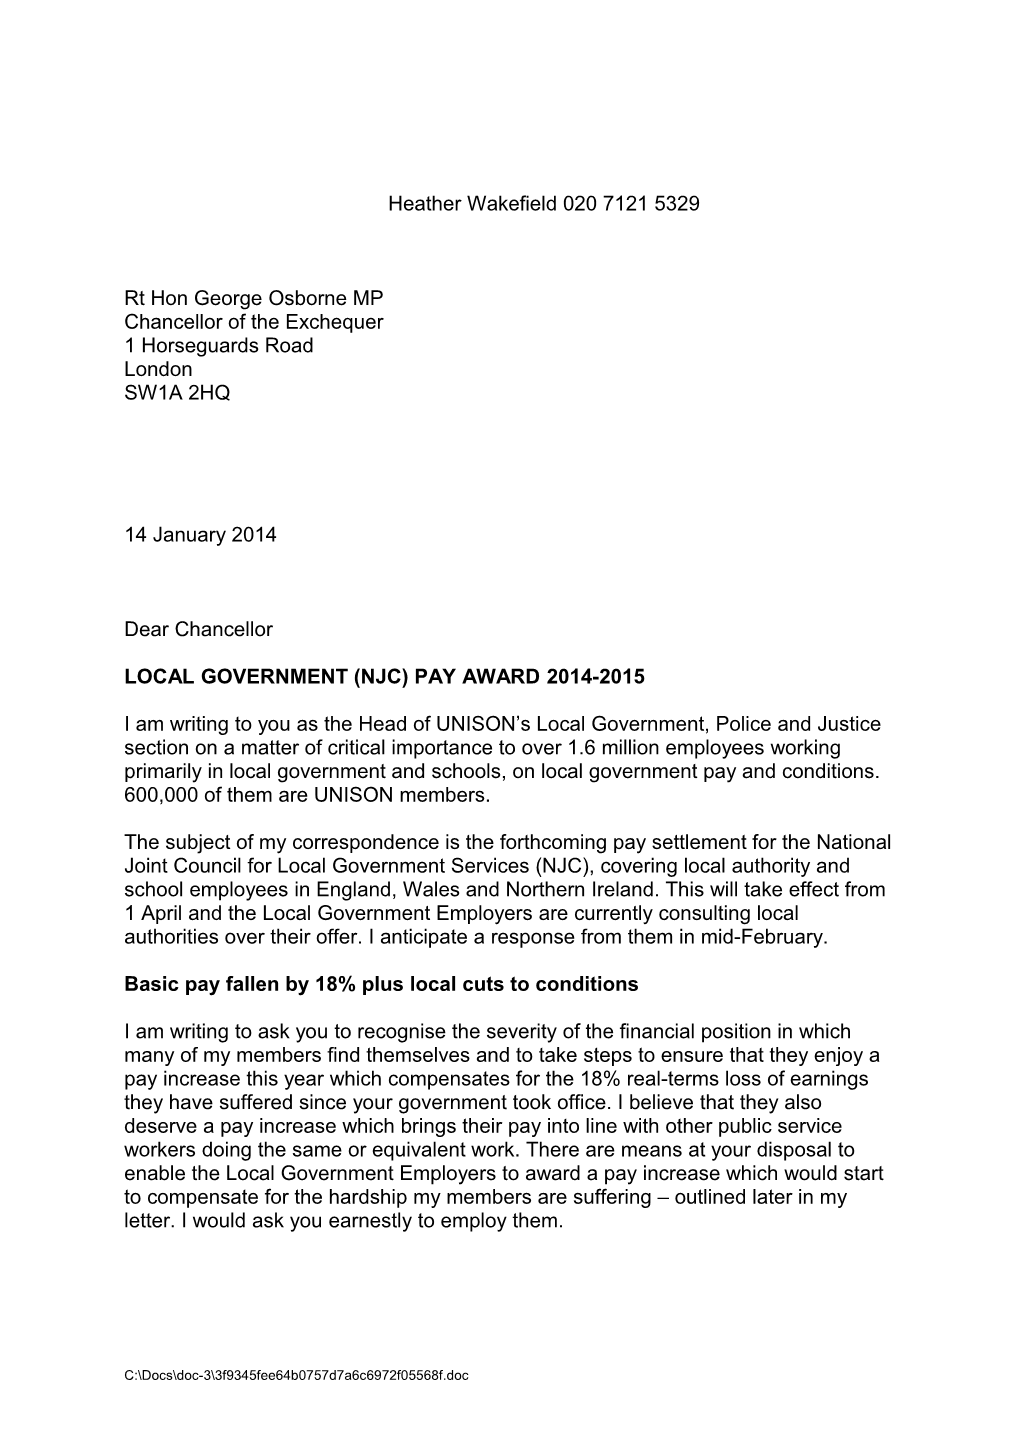 Local Government (NJC) Pay Award 2014-2015 - Letter to George Osborne